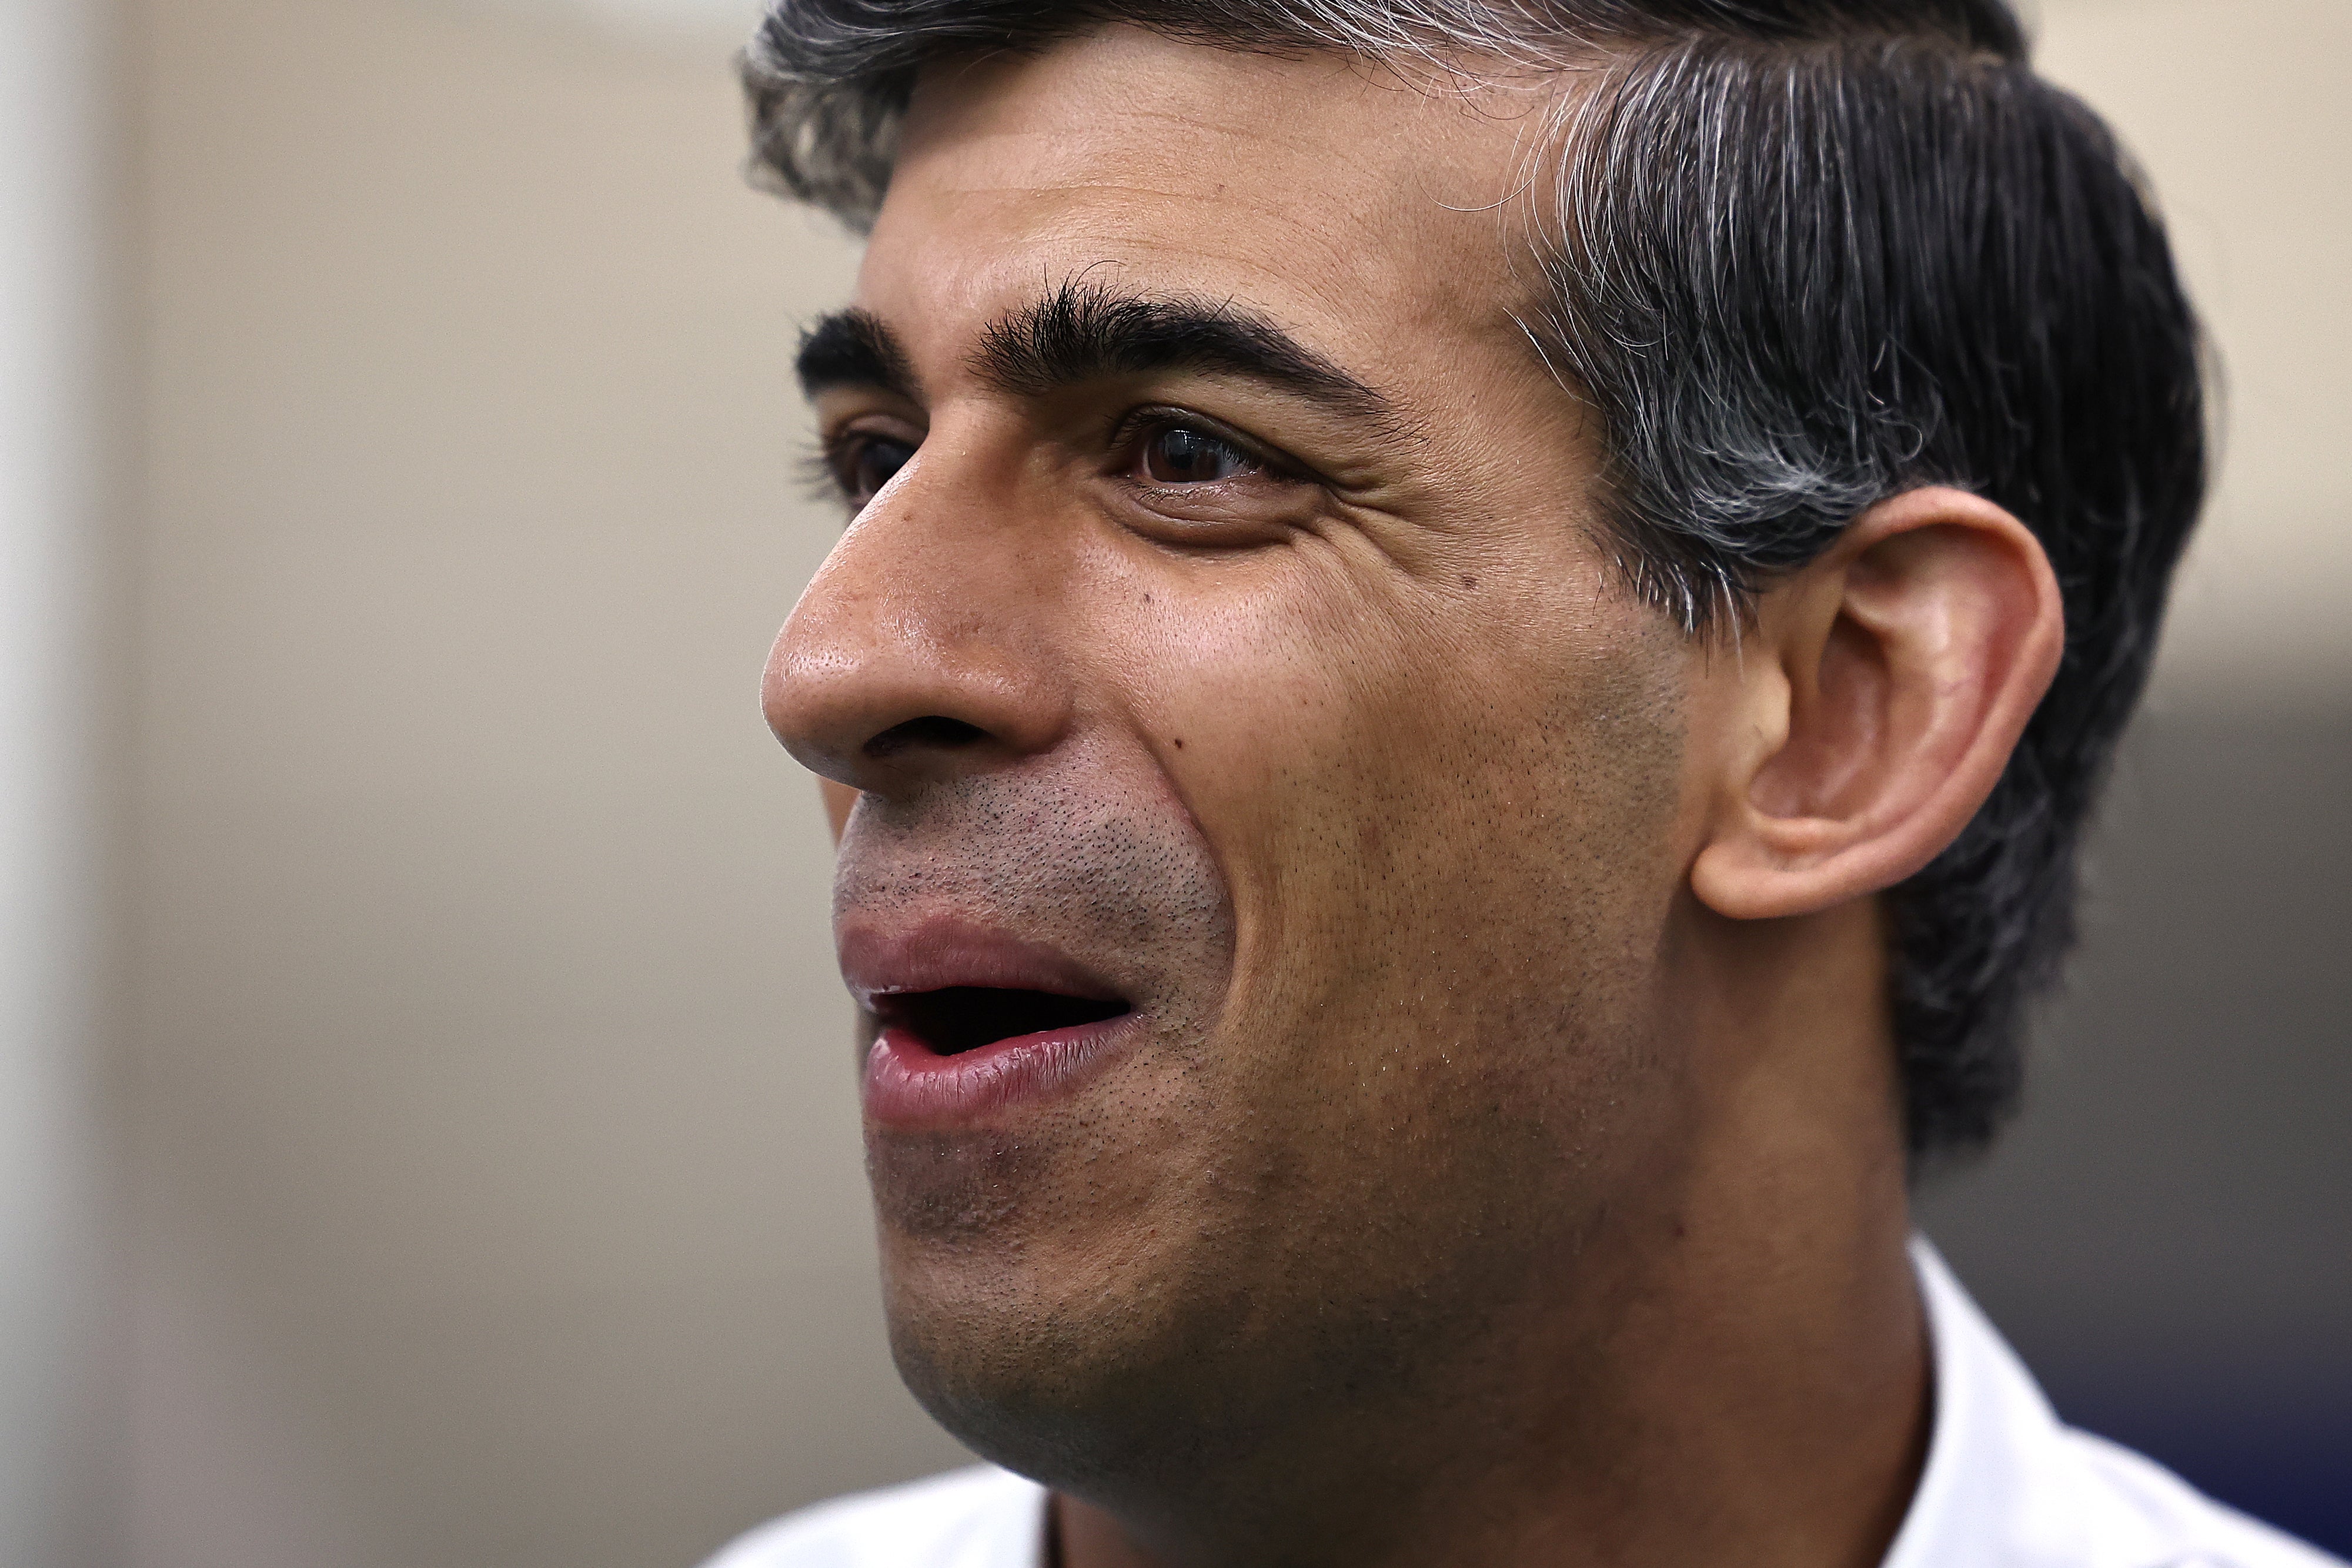 Rishi Sunak has resisted calls to suspend arms sales to Israel